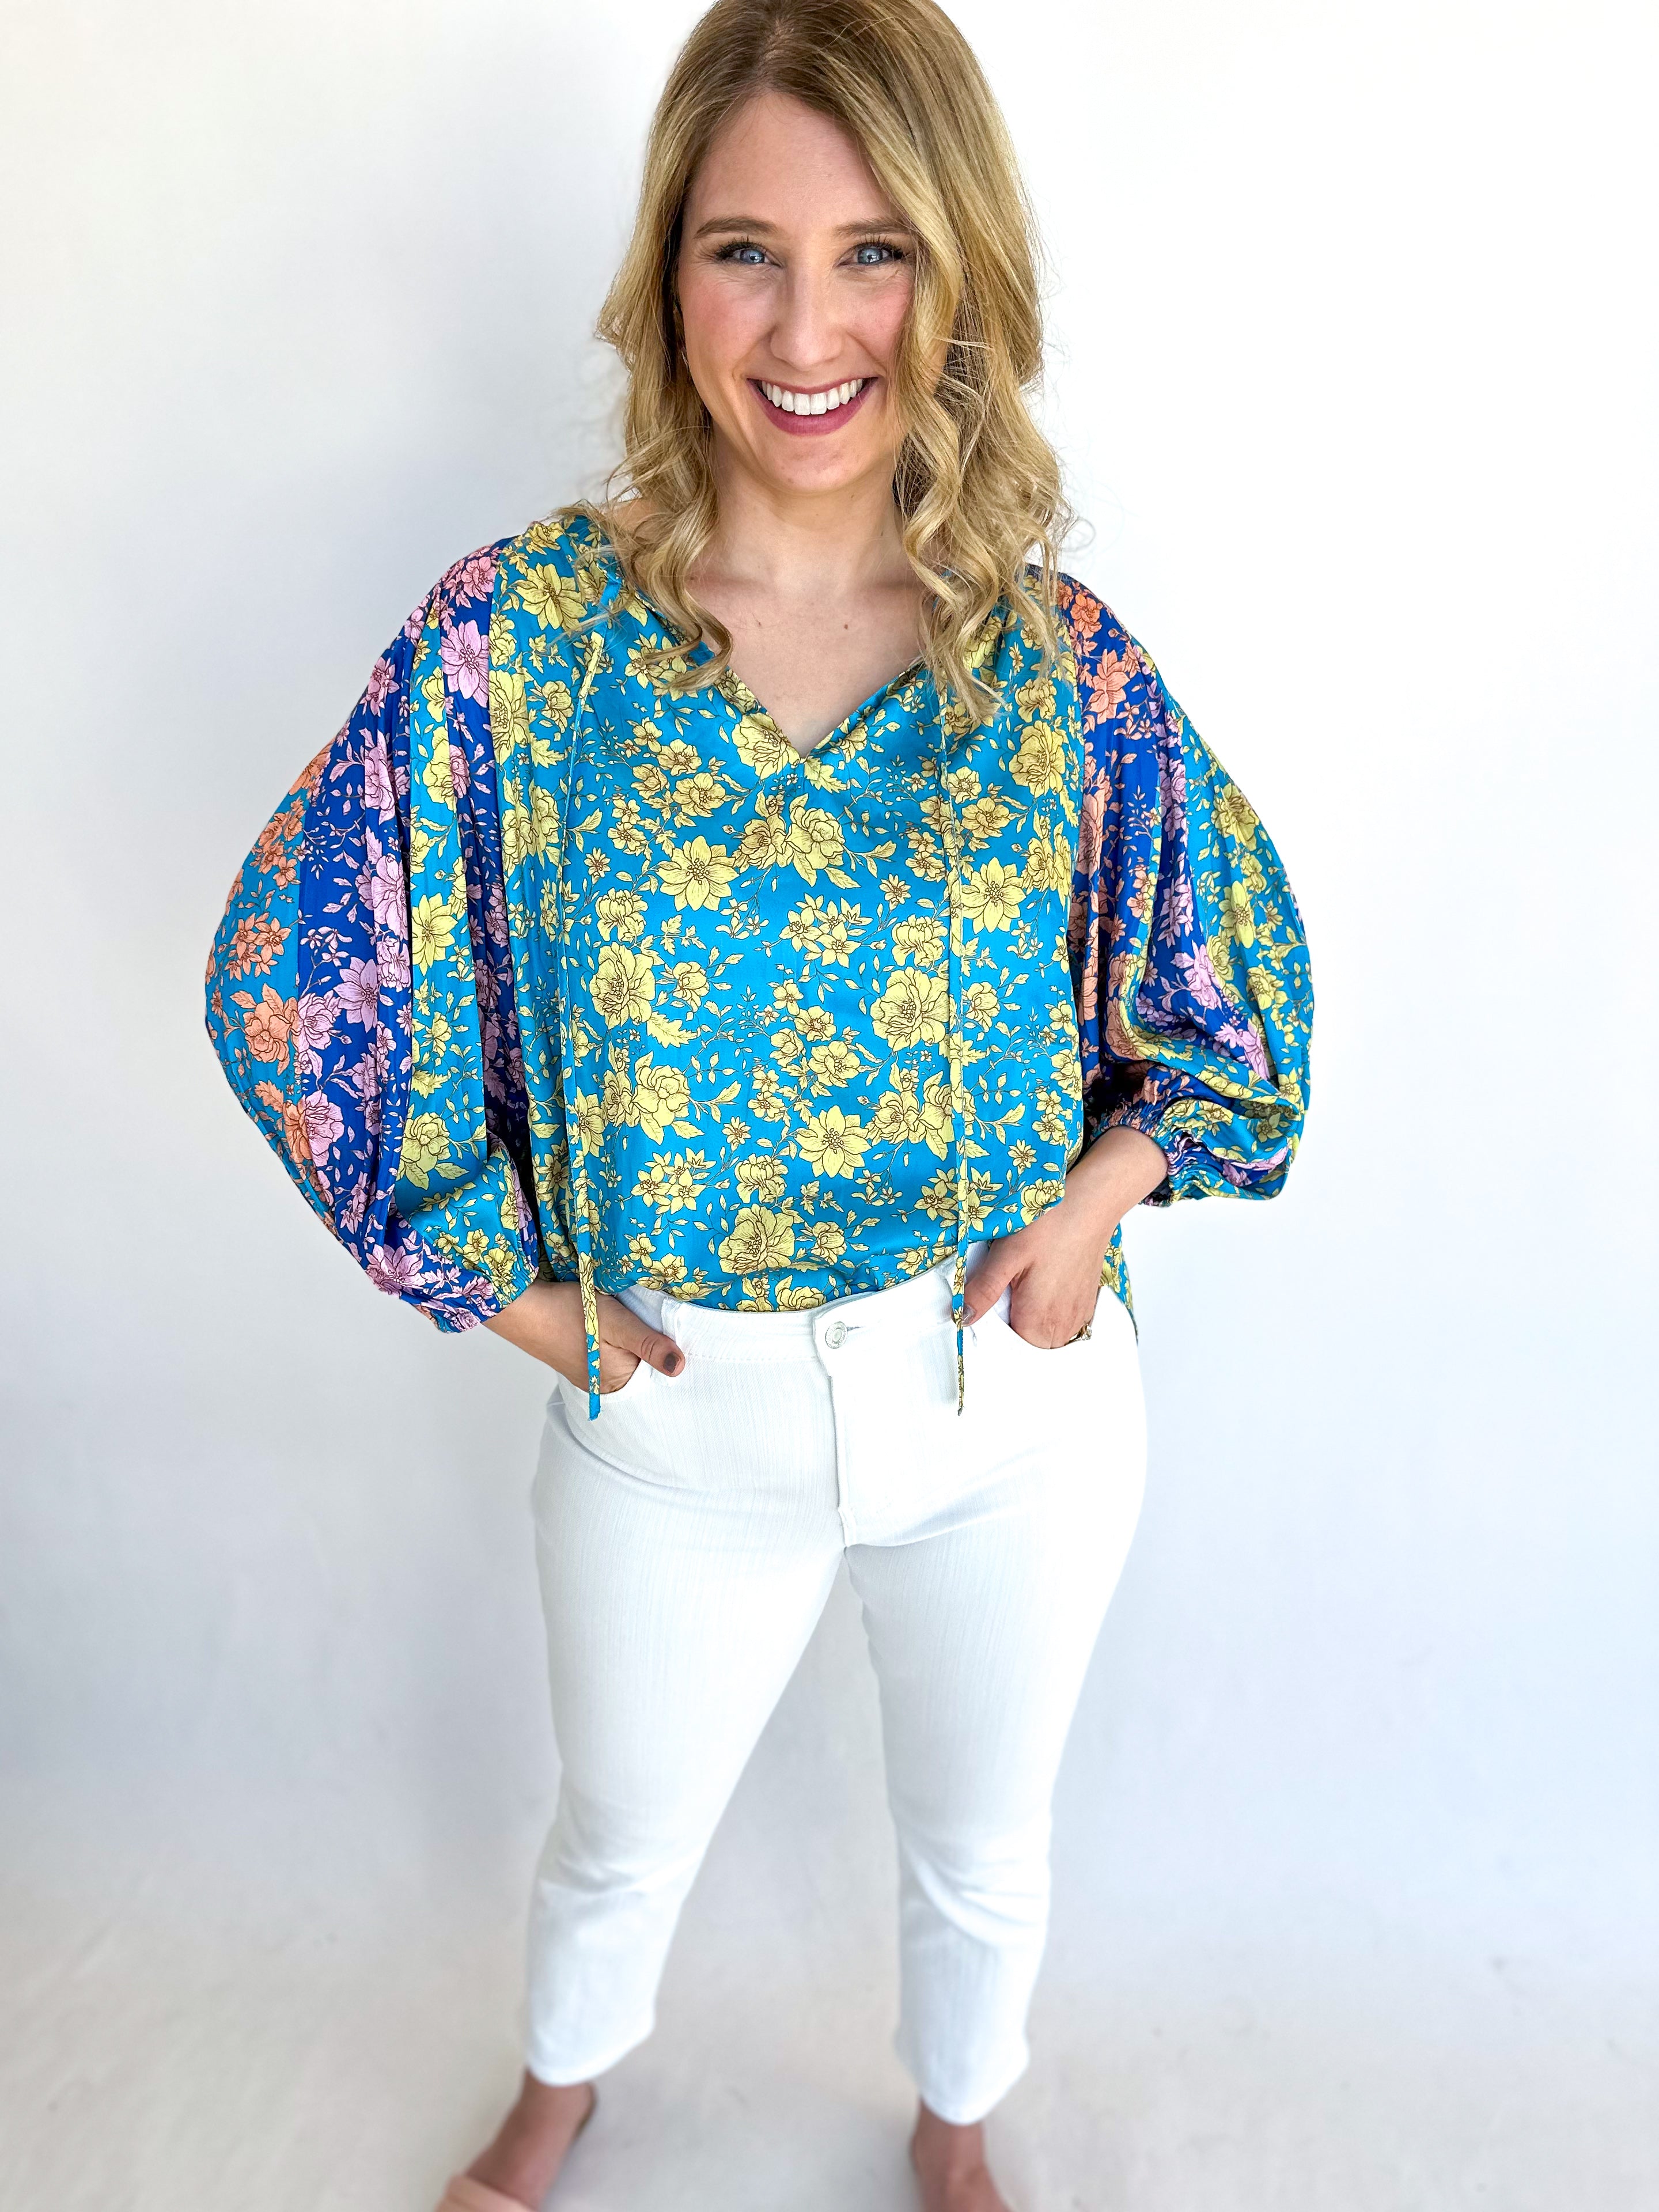 Spring is Coming Blouse - Teal-200 Fashion Blouses-CURRENT AIR CLOTHING-July & June Women's Fashion Boutique Located in San Antonio, Texas